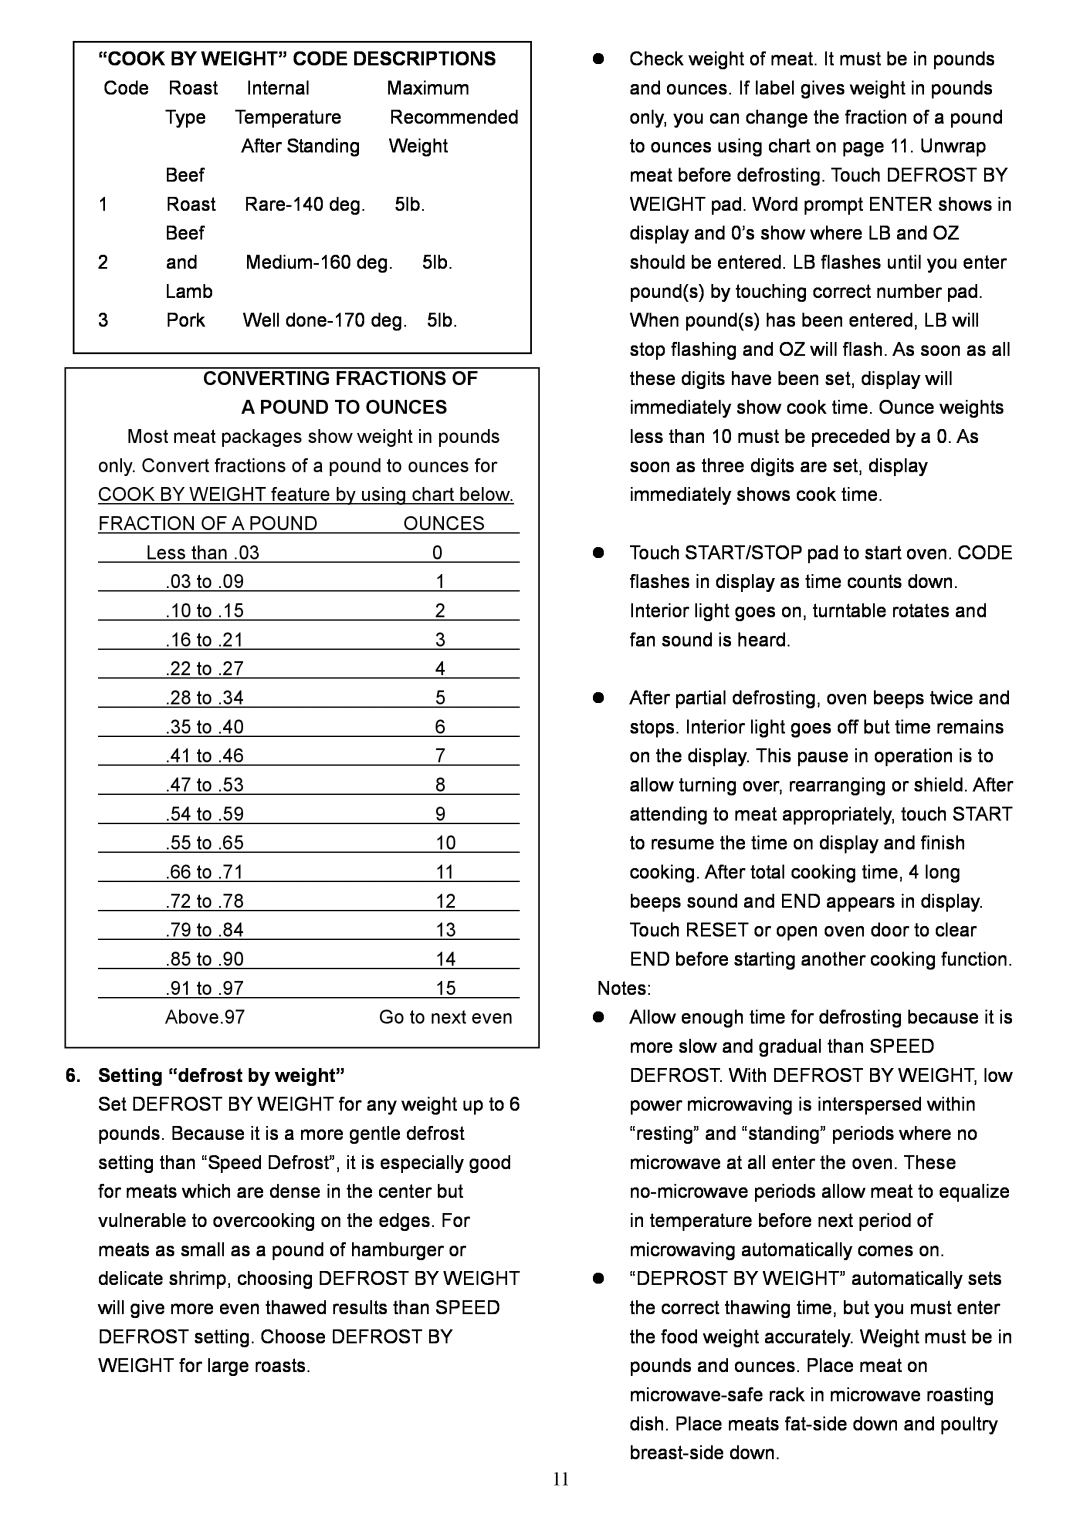 Danby DMW1147SS owner manual “Cook By Weight” Code Descriptions, Converting Fractions Of, Setting “defrost by weight” 